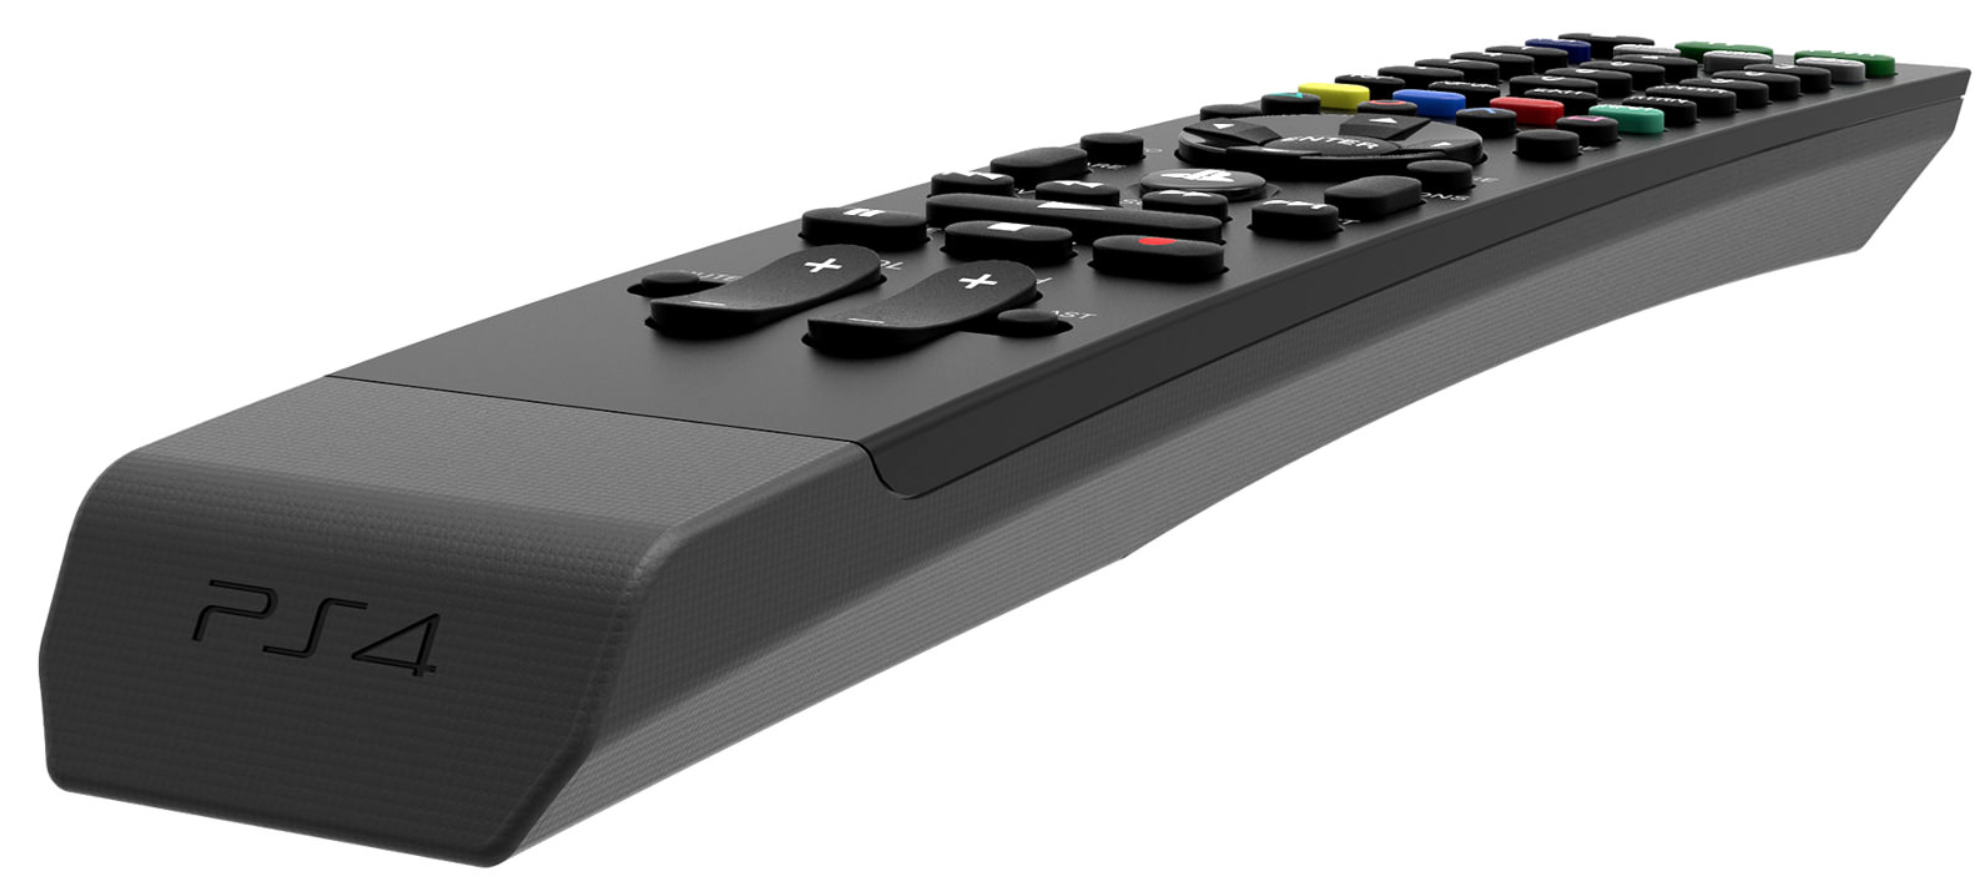 A New PS4 Remote Makes The Playstation A Halfway Decent ...